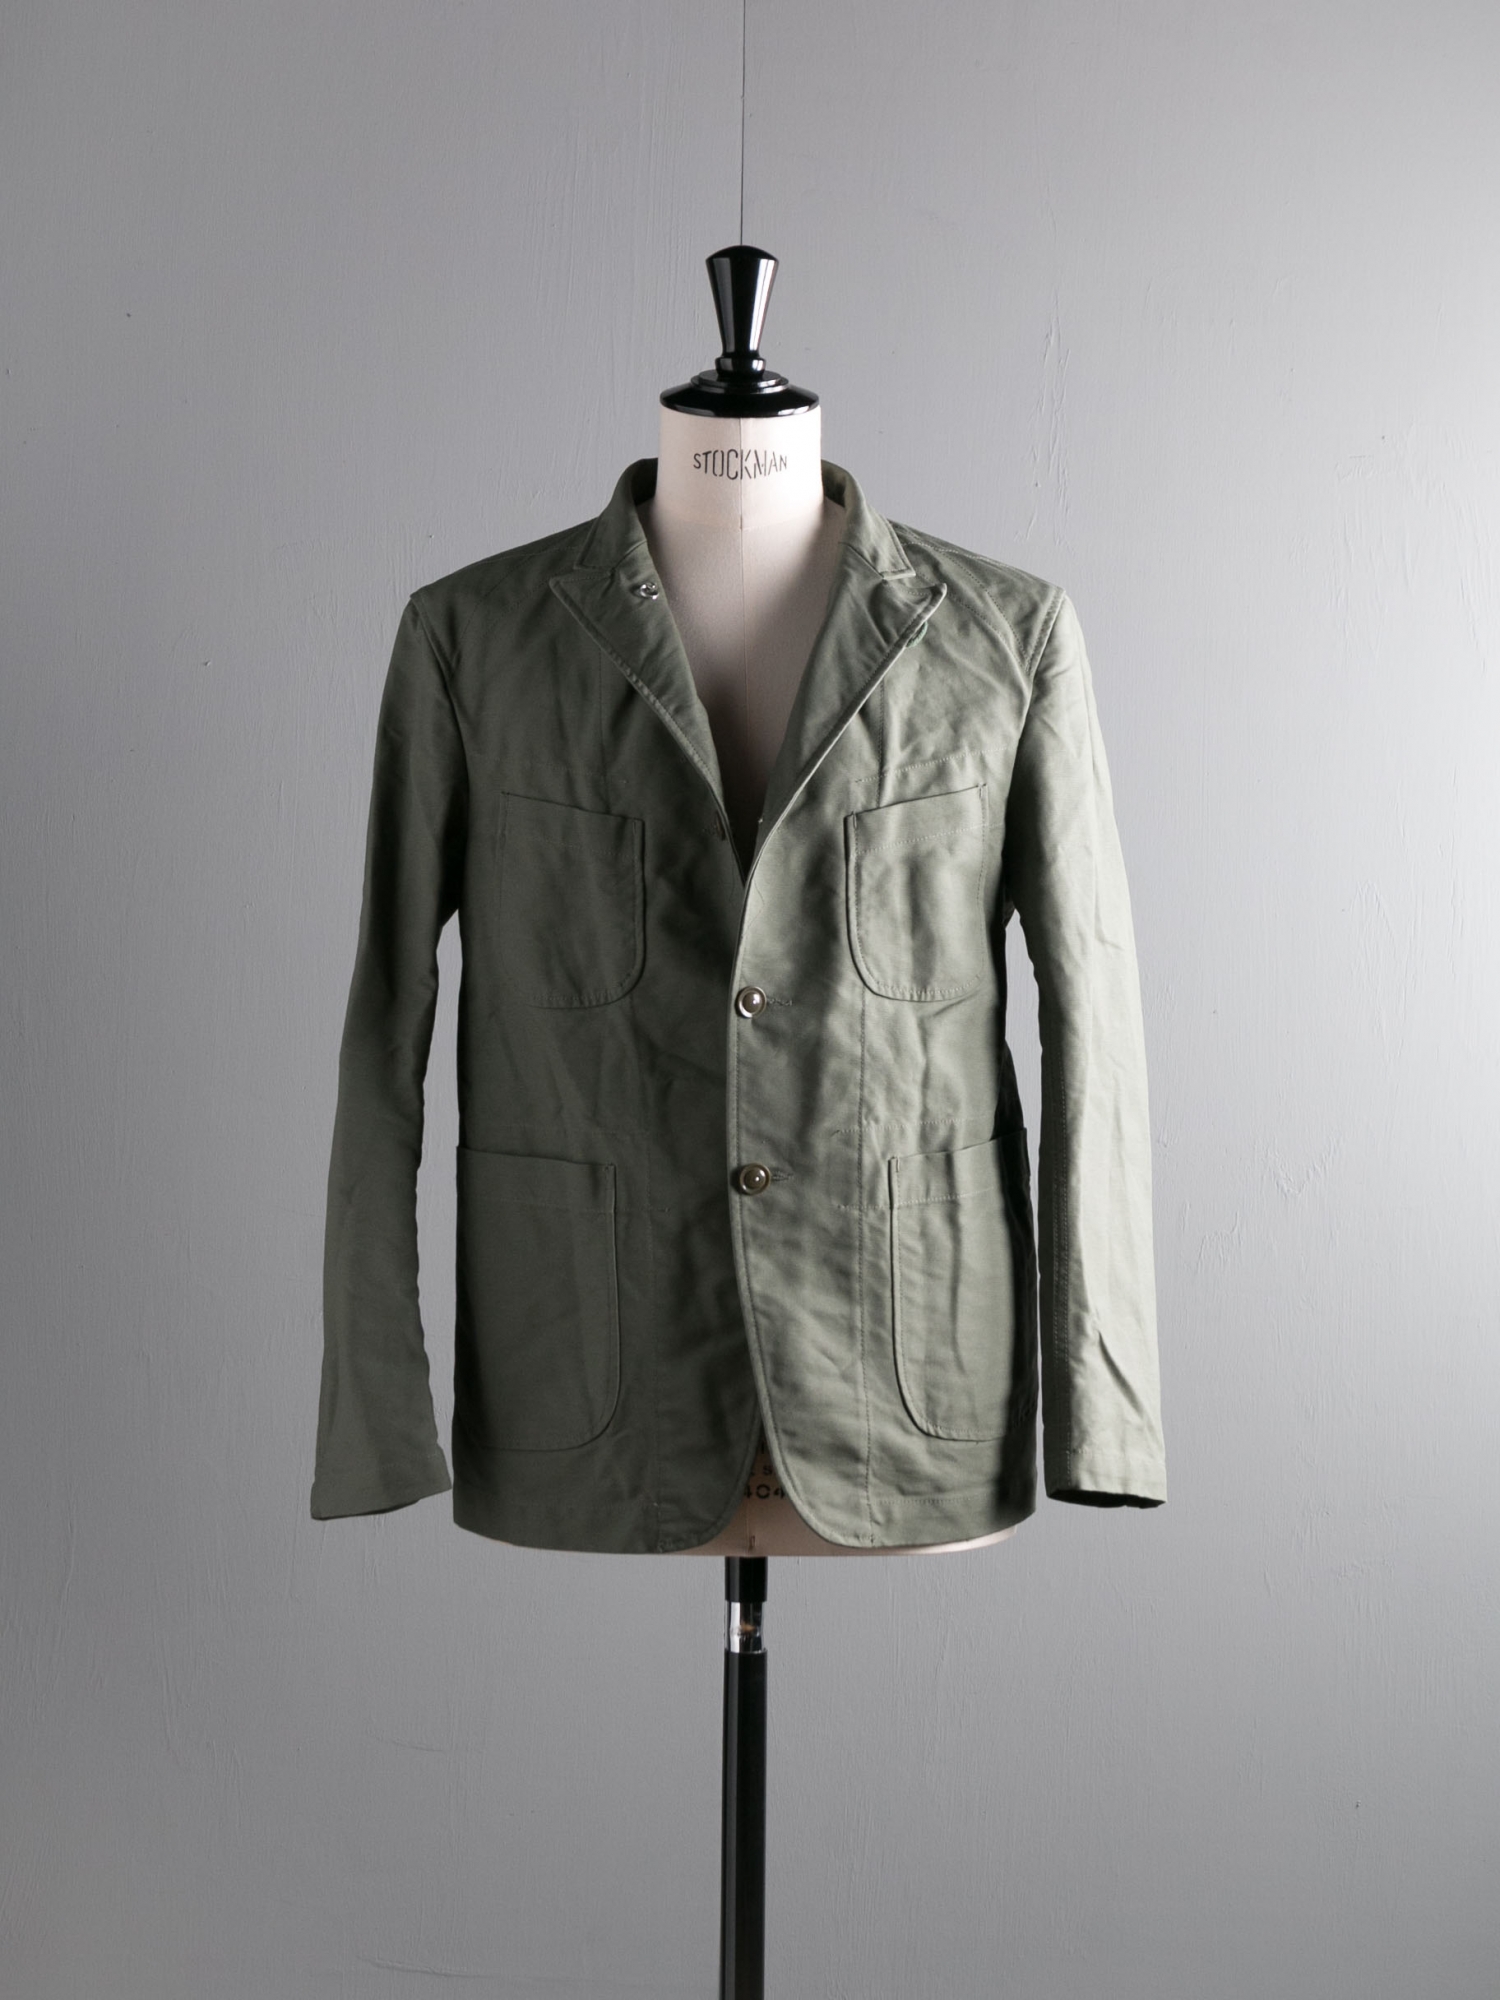 BEDFORD JACKET – COTTON DOUBLE CLOTH Olive | Dresswell online store